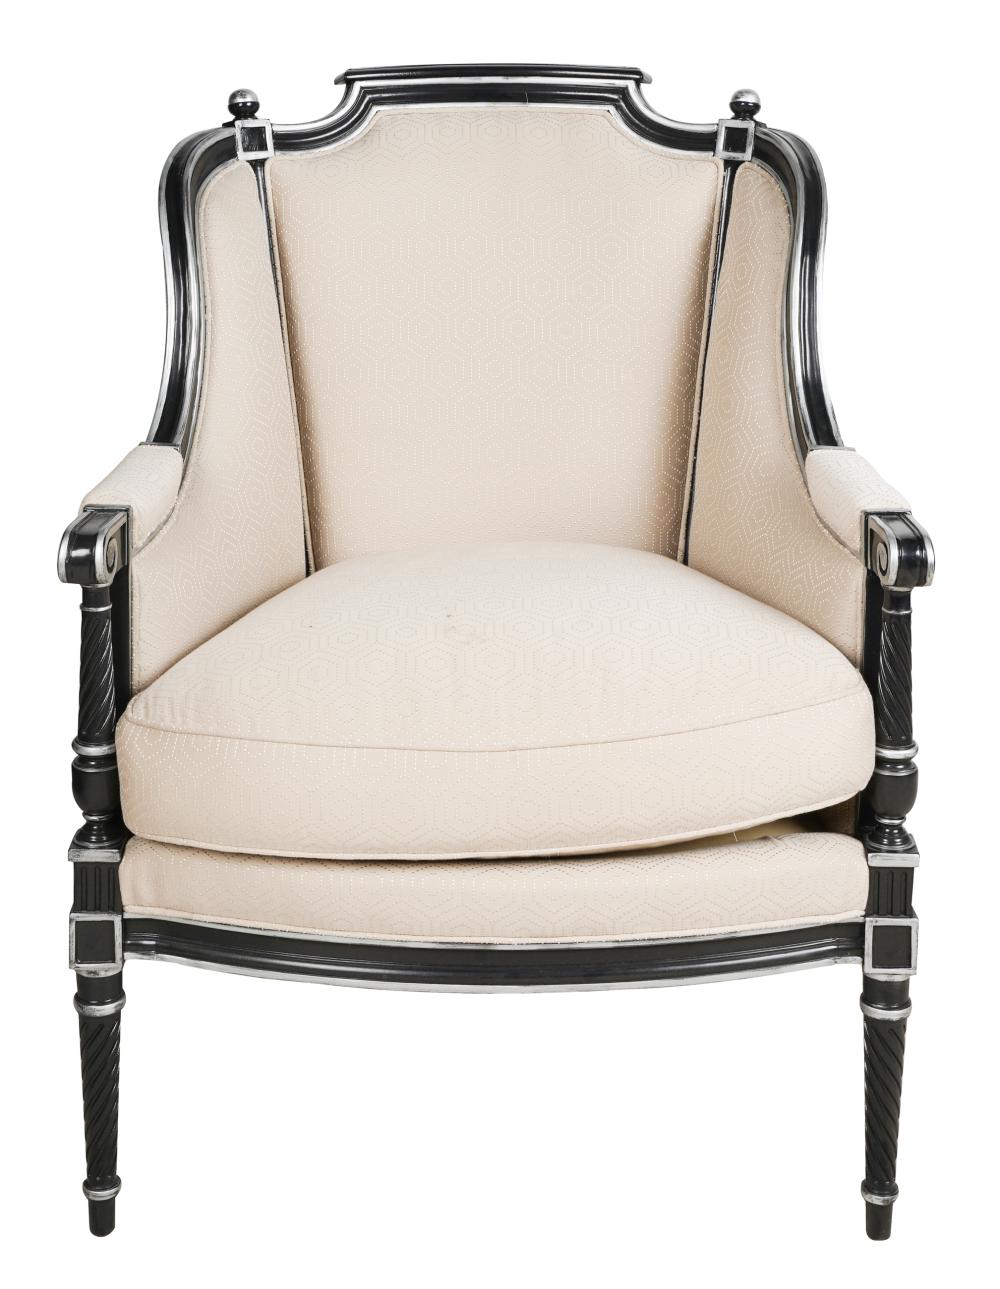 HICKORY CHAIR EBONIZED WOOD BERGEREwith